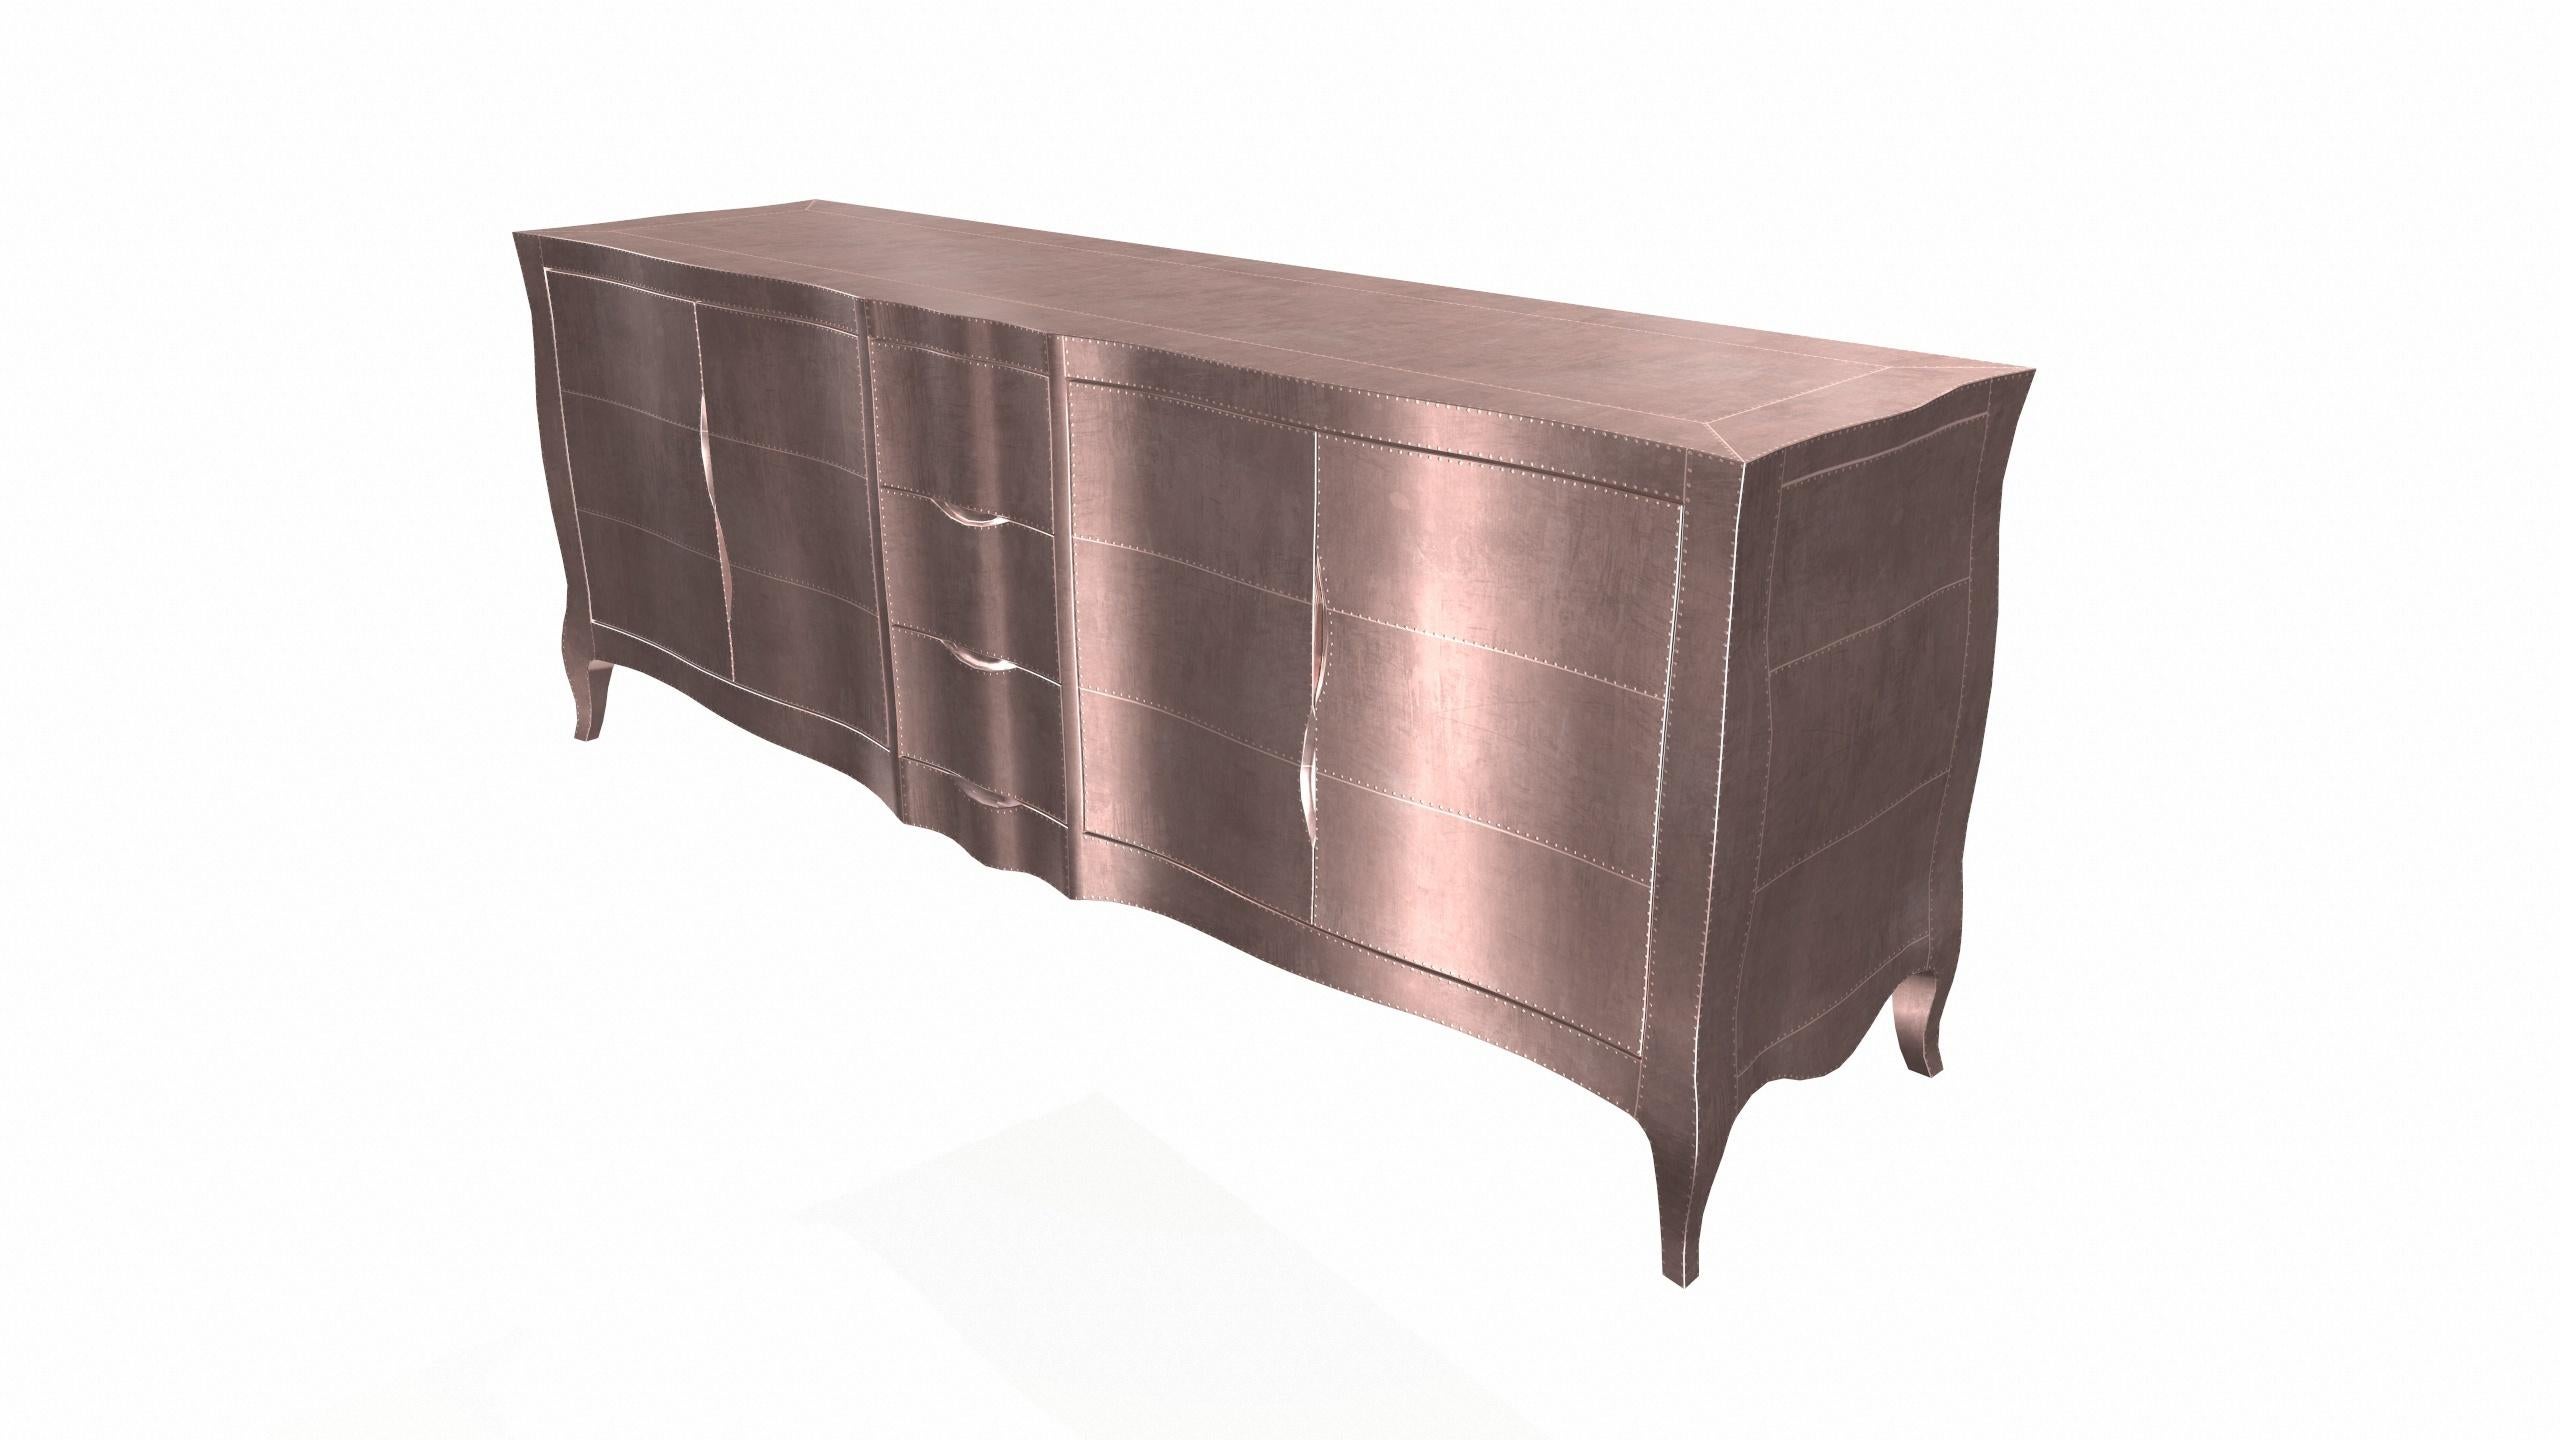 American Louise Credenza Art Deco Credenza in Smooth Copper by Paul Mathieu for S Odegard For Sale